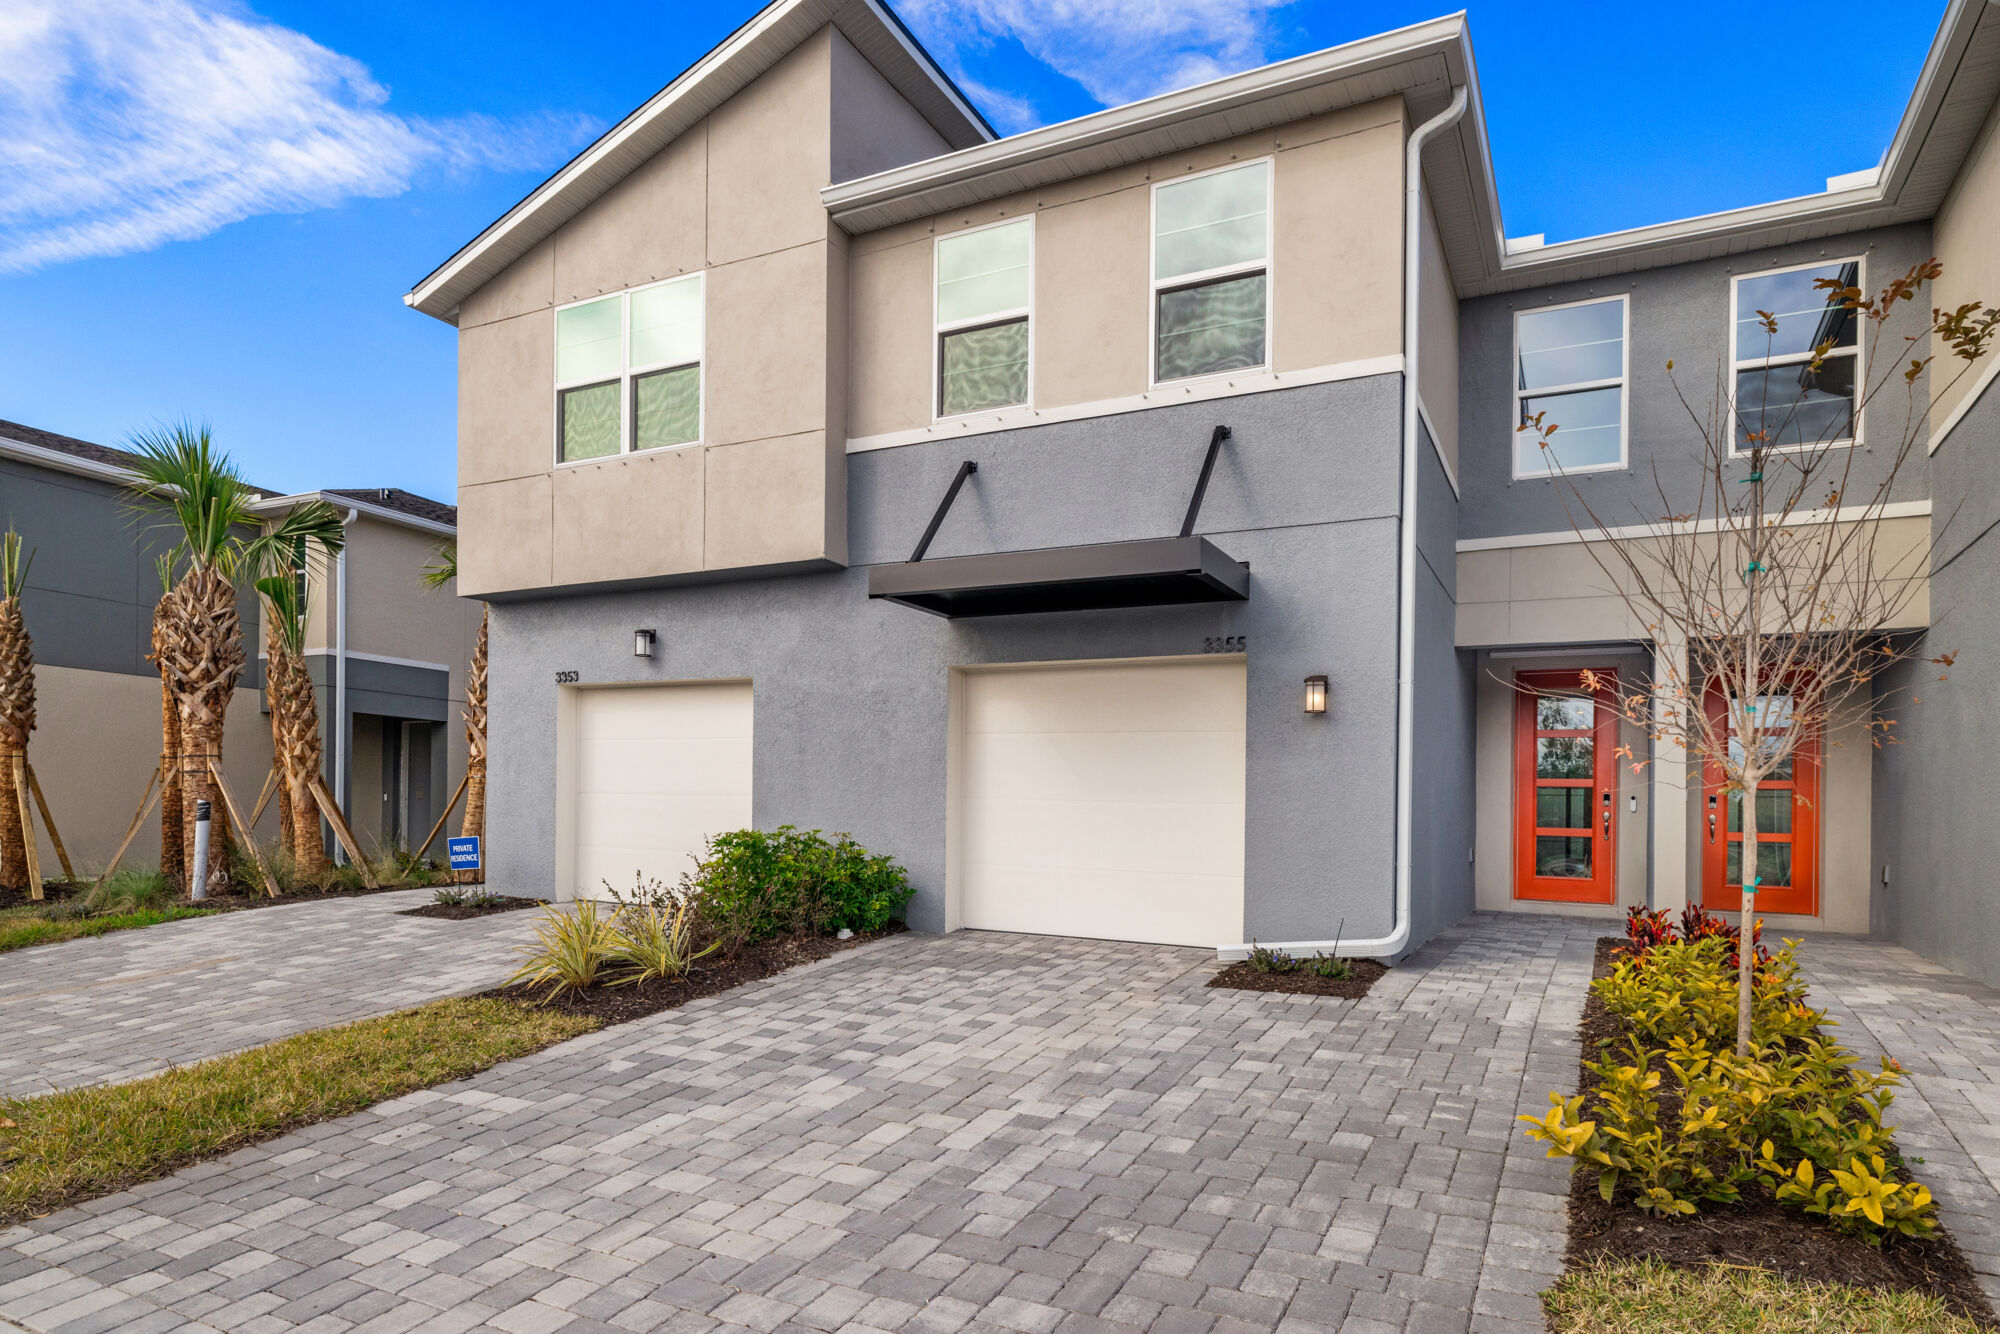 Townhome, 3 bedroom, 2 full baths, powder room, loft, screened lanai, contemporary exterior, light gray cabinets, contrasting Frost White quartz countertops, plank tile flooring on main level. laundry room, stainless steel appliances, refrigerator